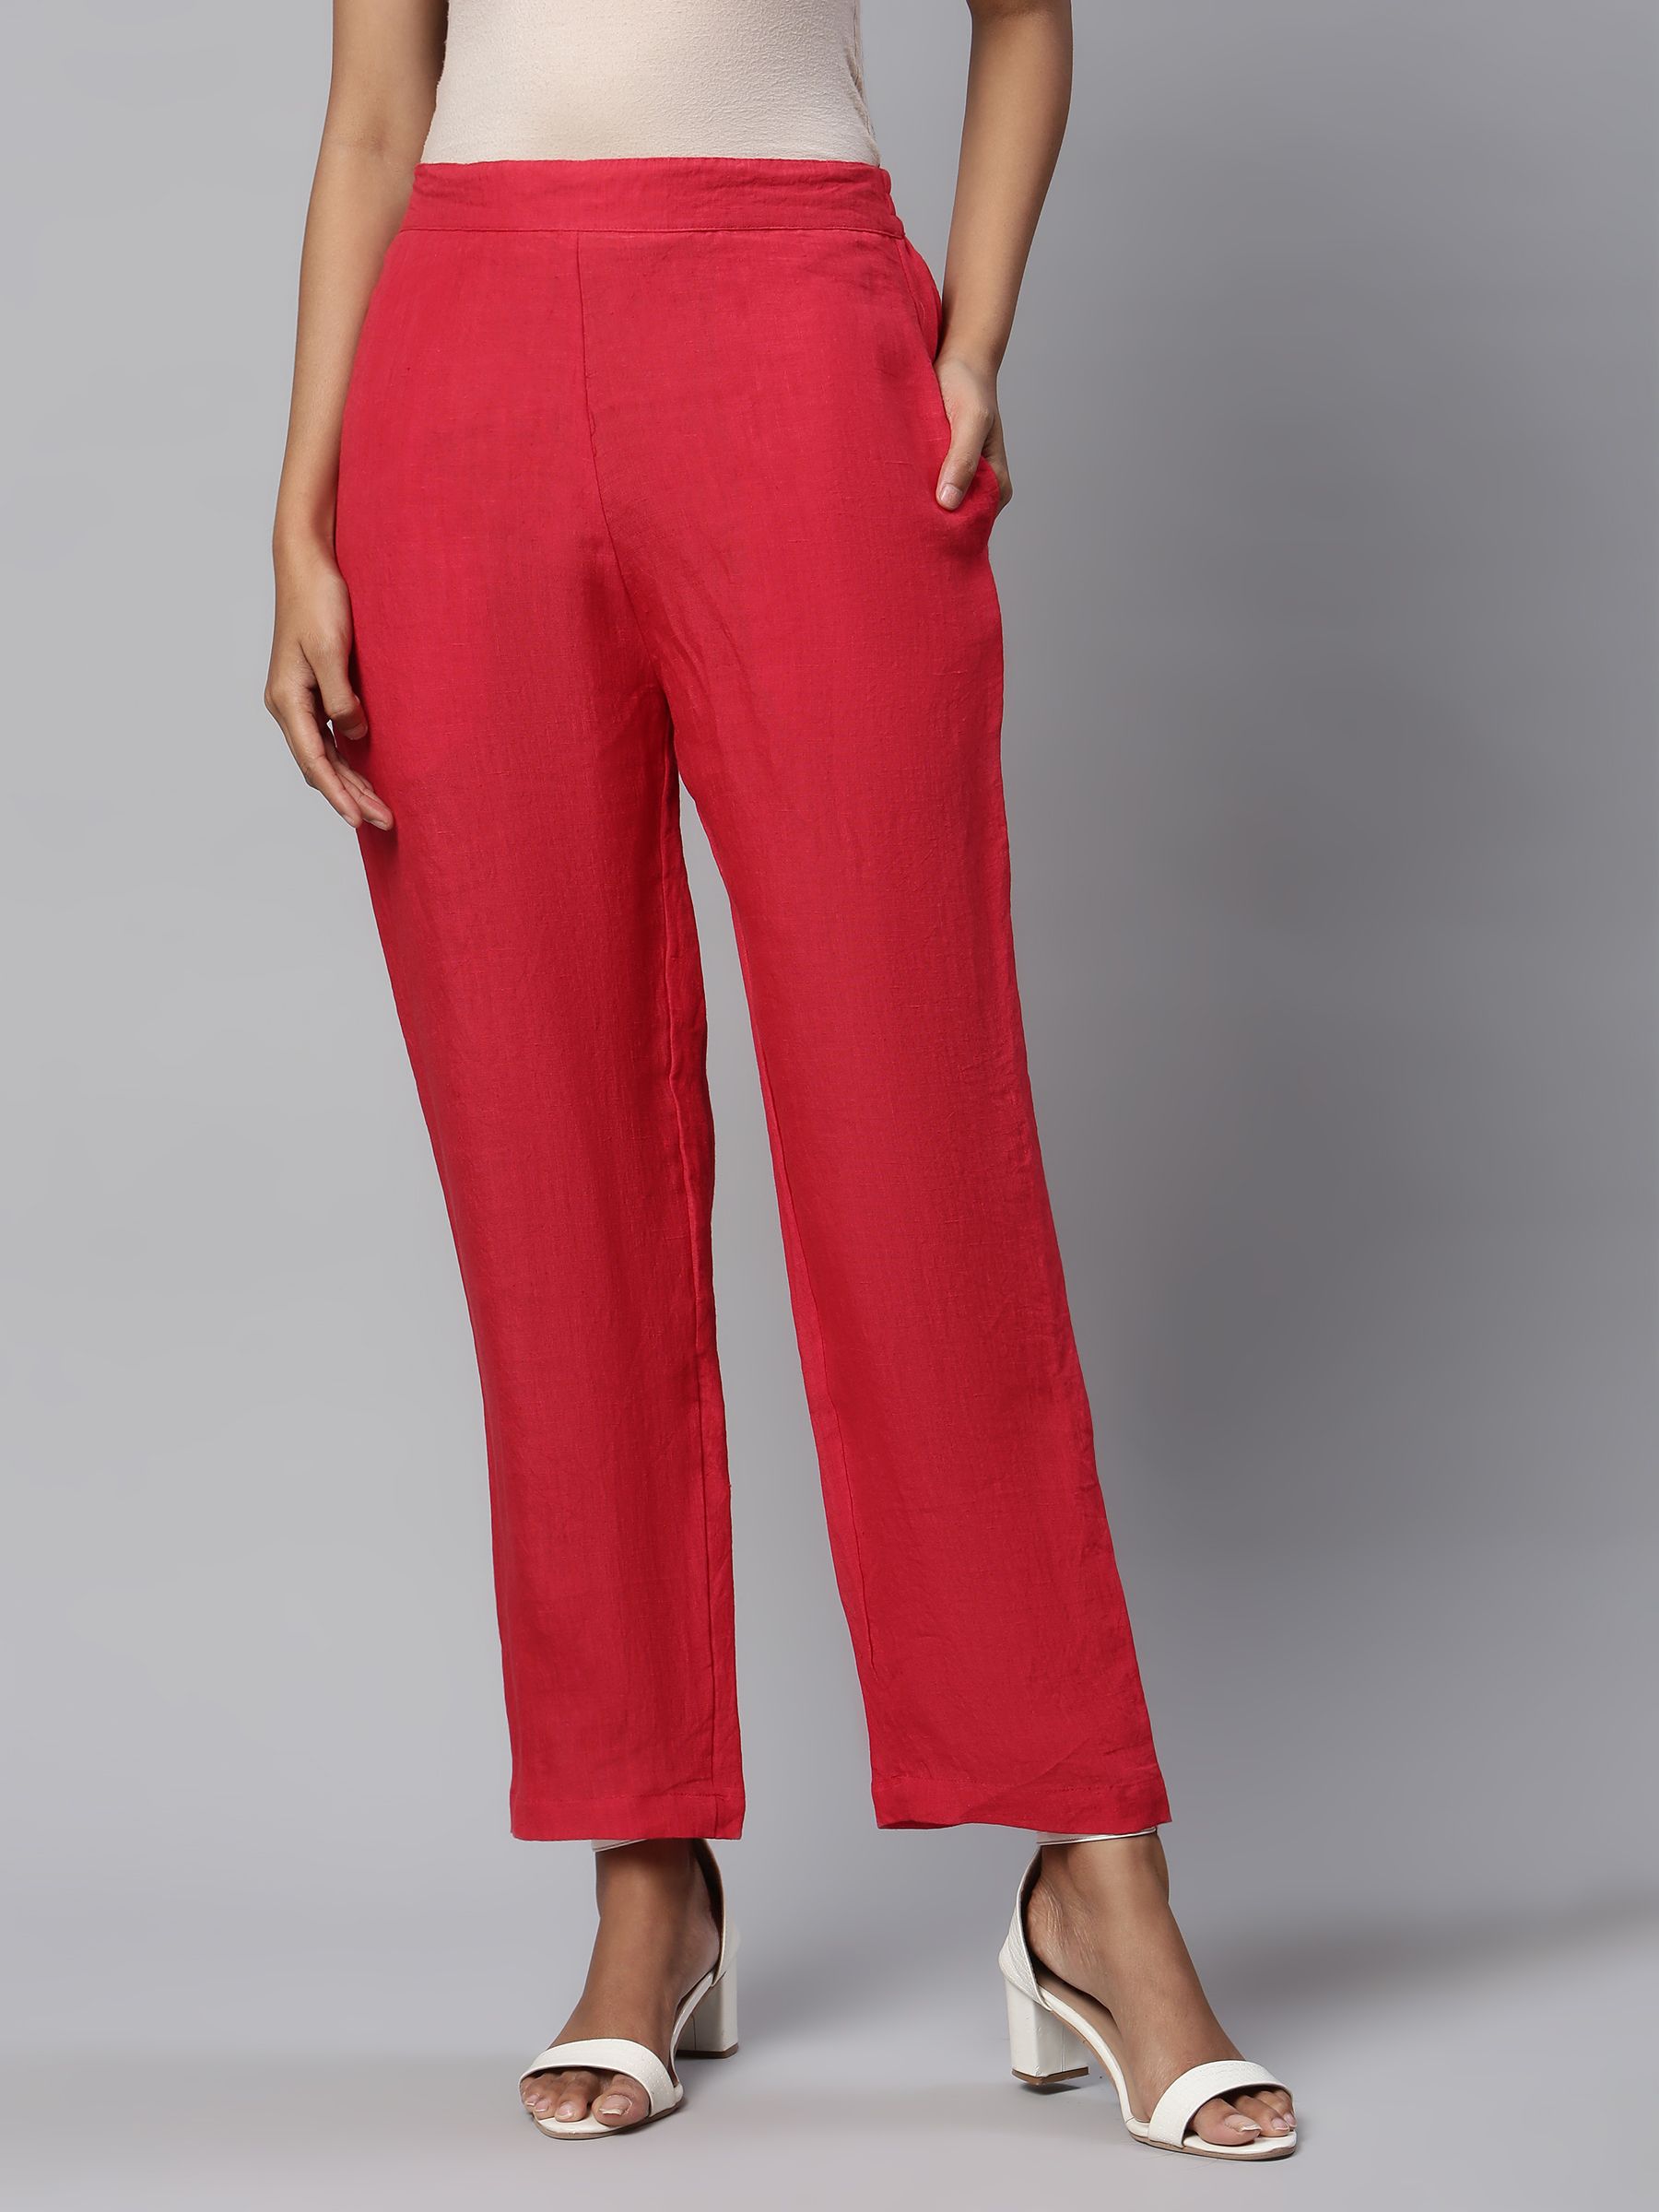 Women's Cotton Solid Ankle Length Trouser Pant with Double Pocket Red and  Black Combo Set